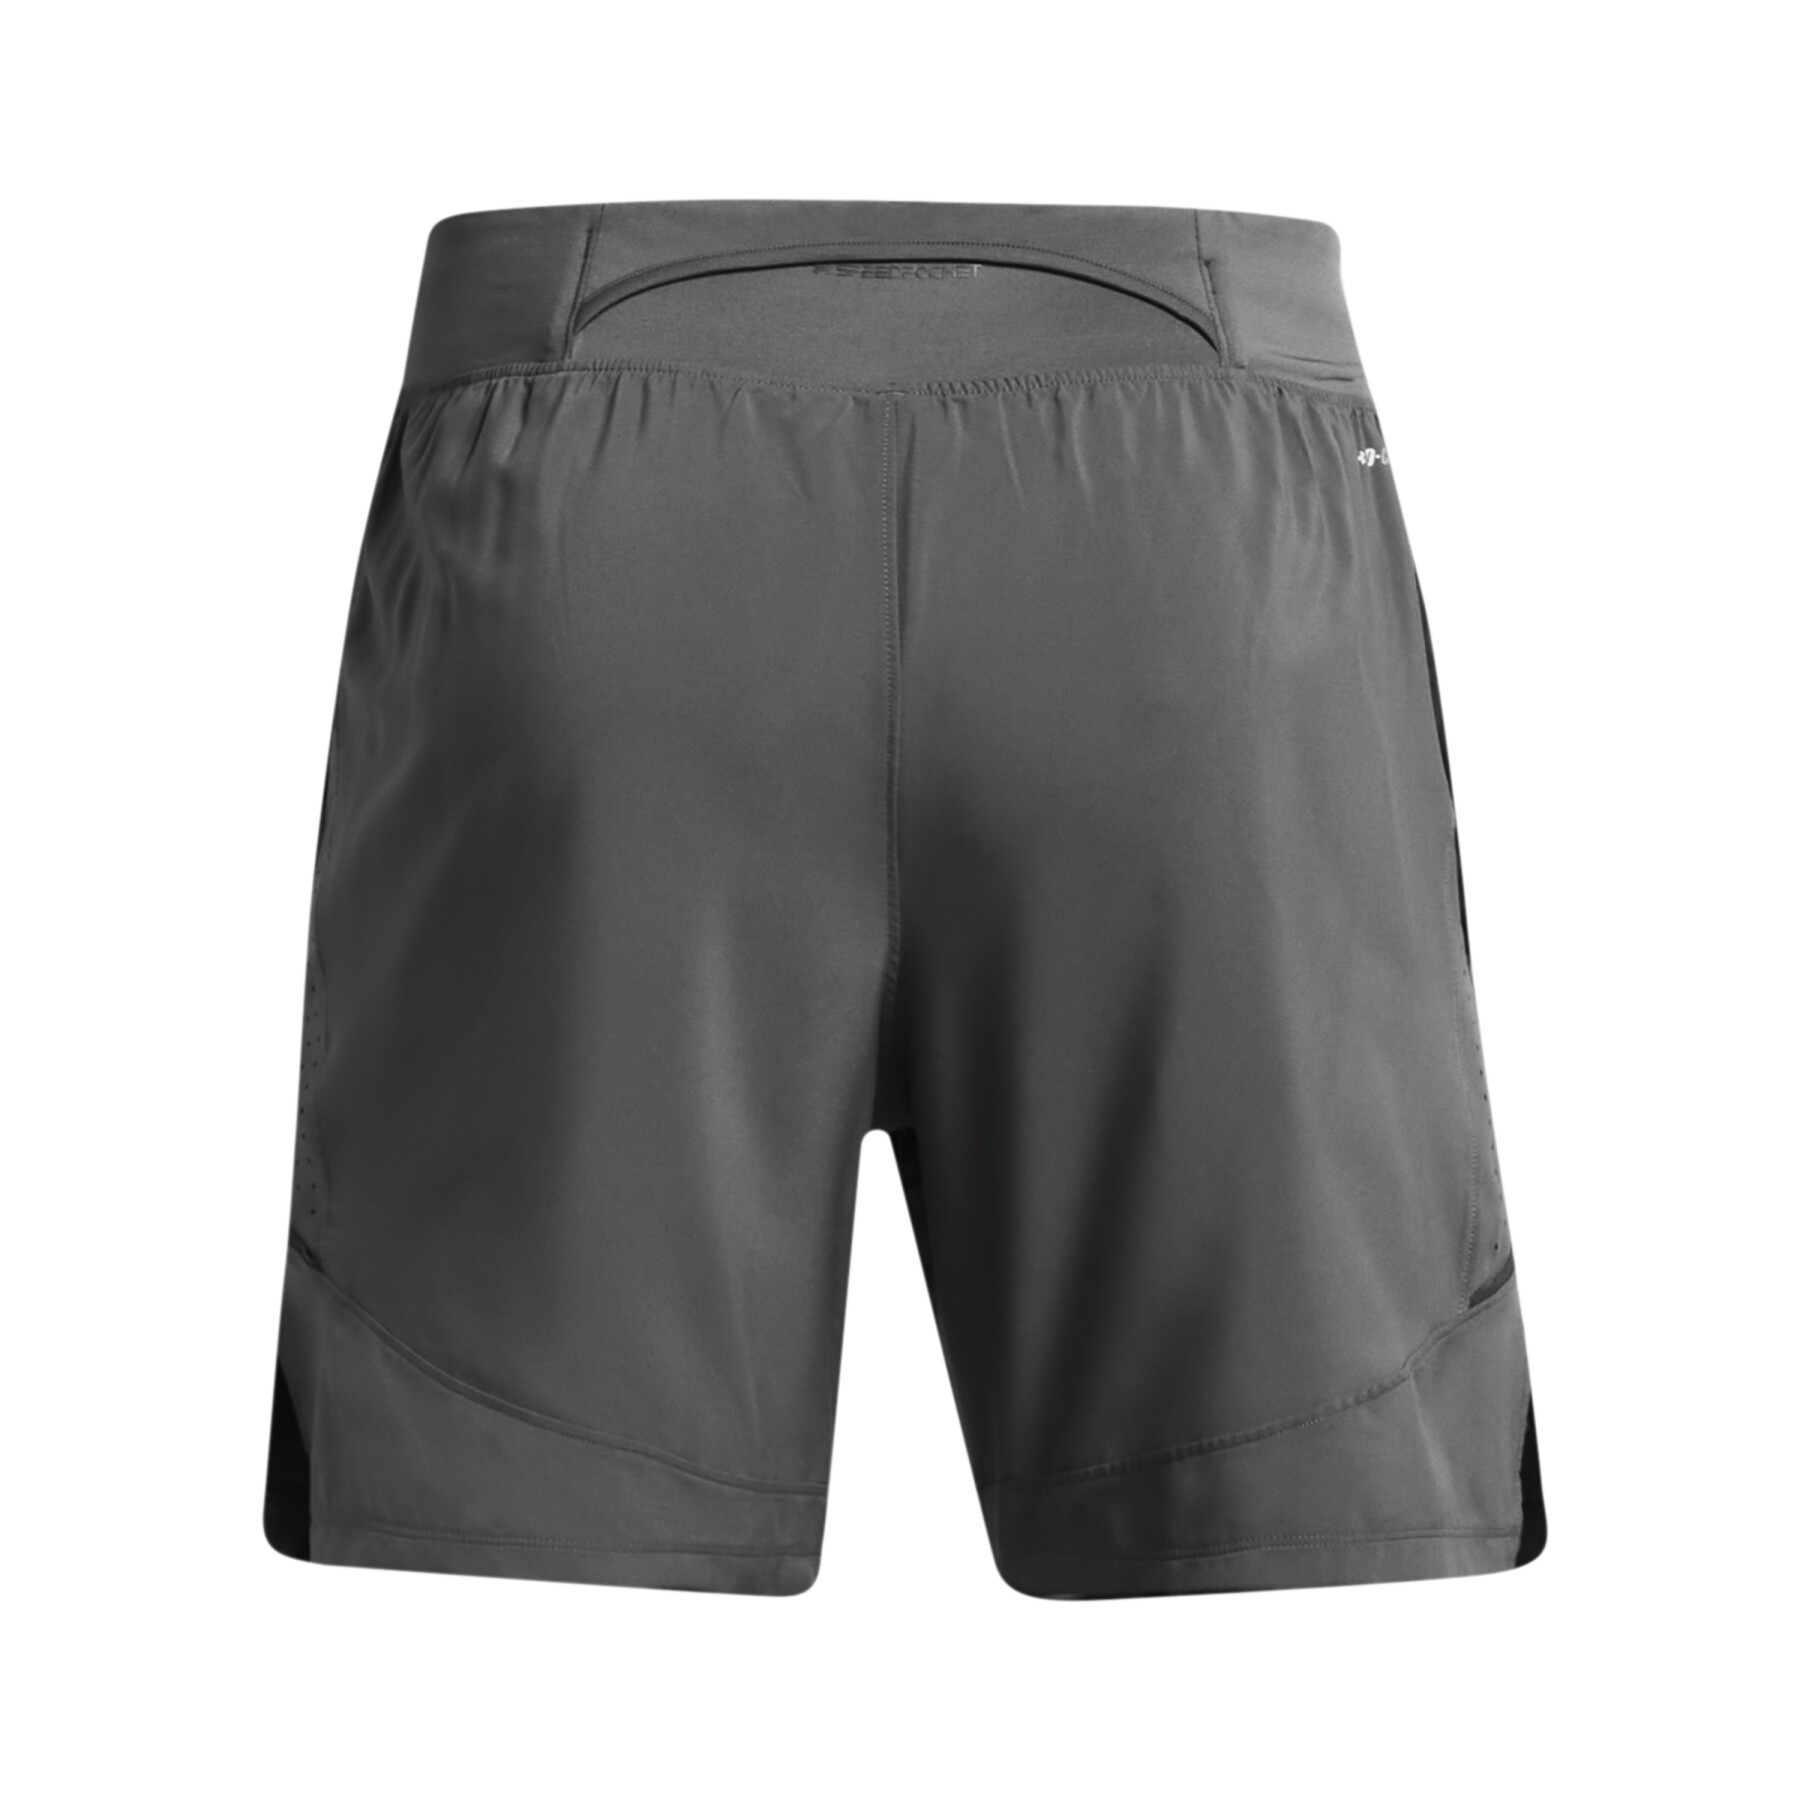 2 in 1 shorts Under Armour Launch Elite 7"